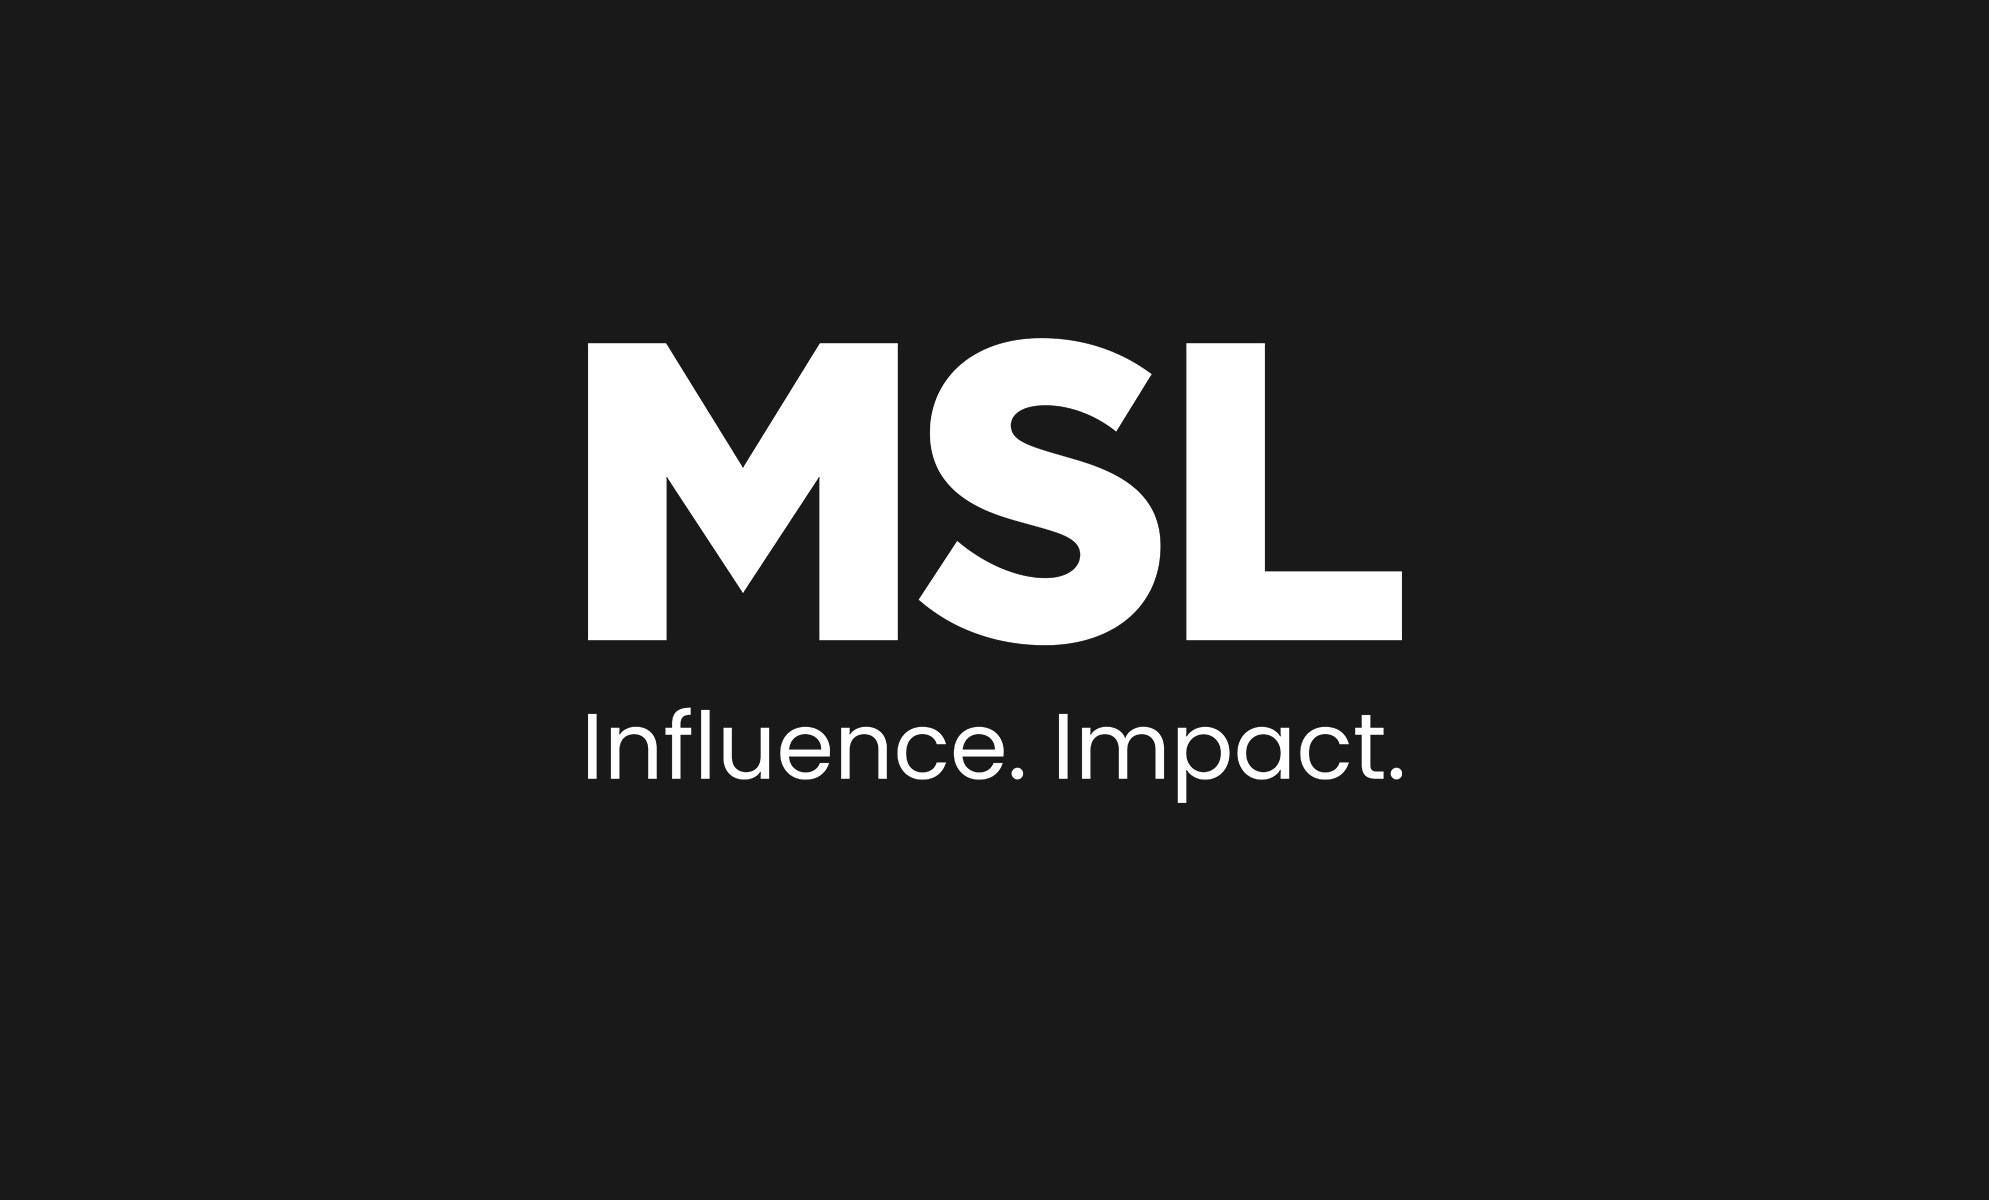 White MSL Logo with Influence. Impact. underneath on black background